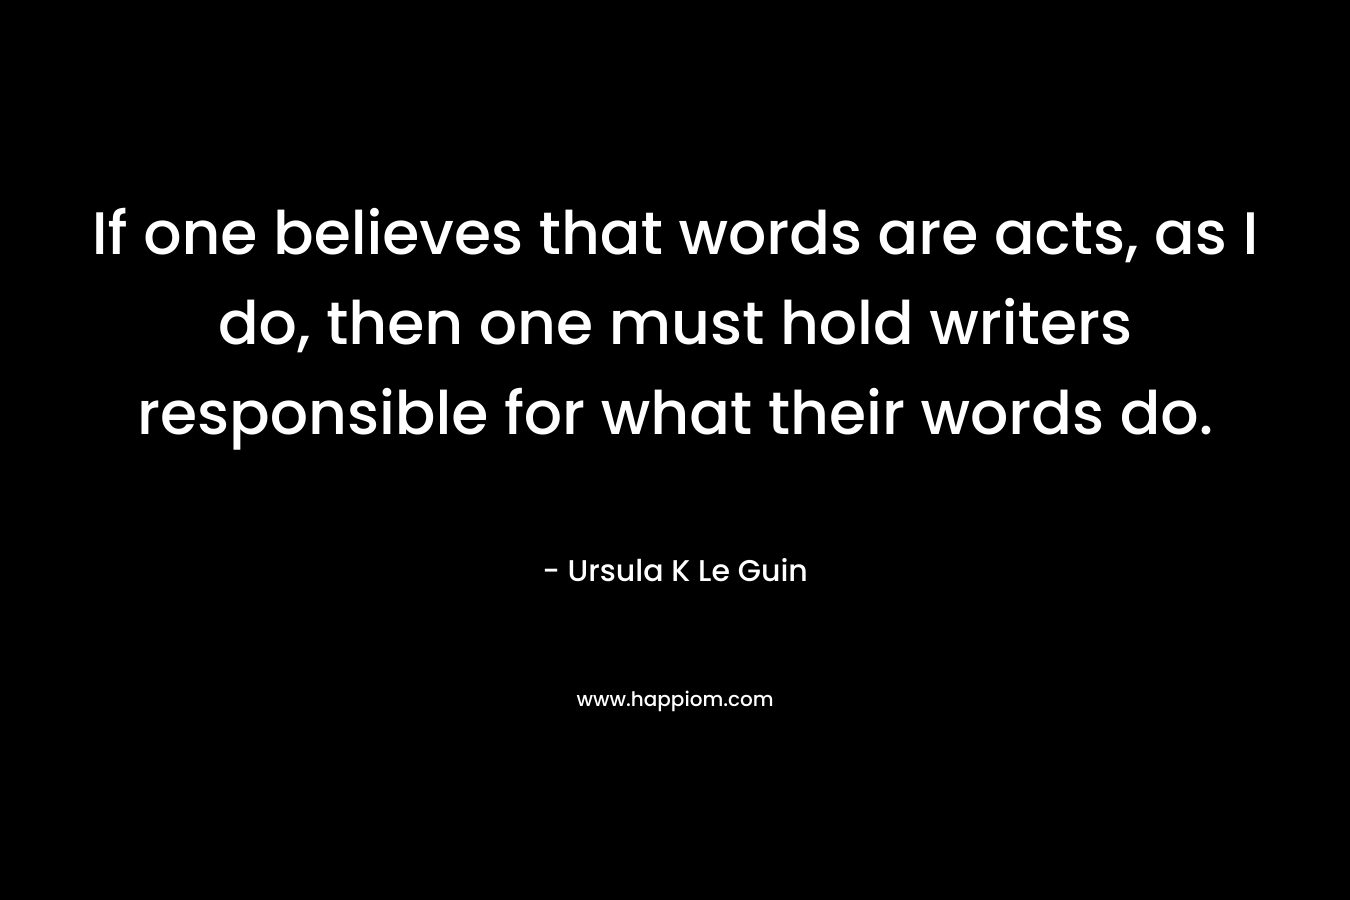 If one believes that words are acts, as I do, then one must hold writers responsible for what their words do.